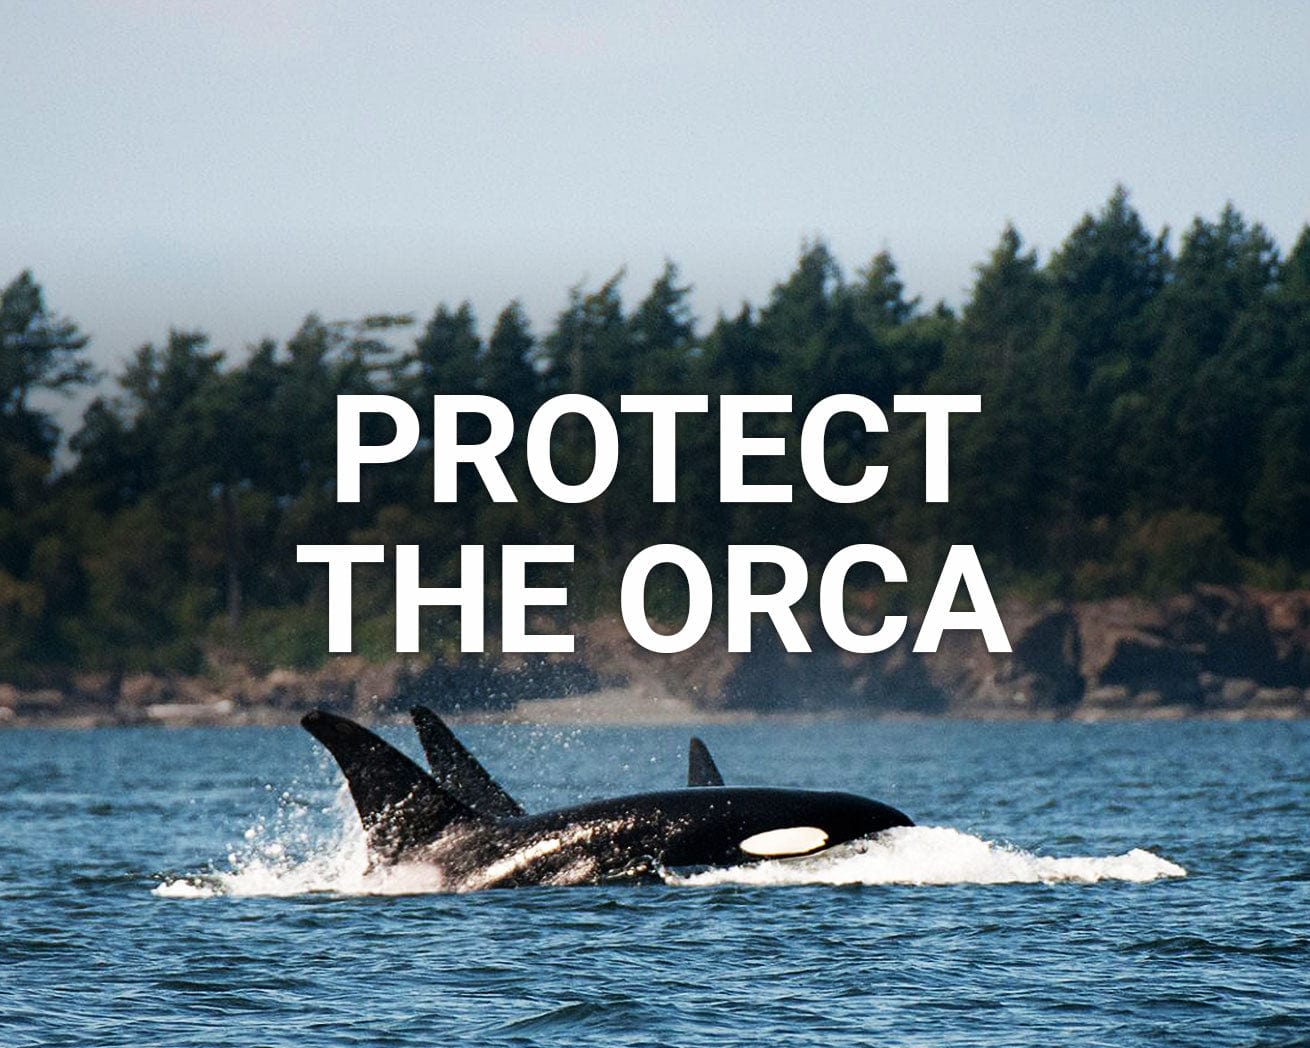 Plant Trees for the Orca